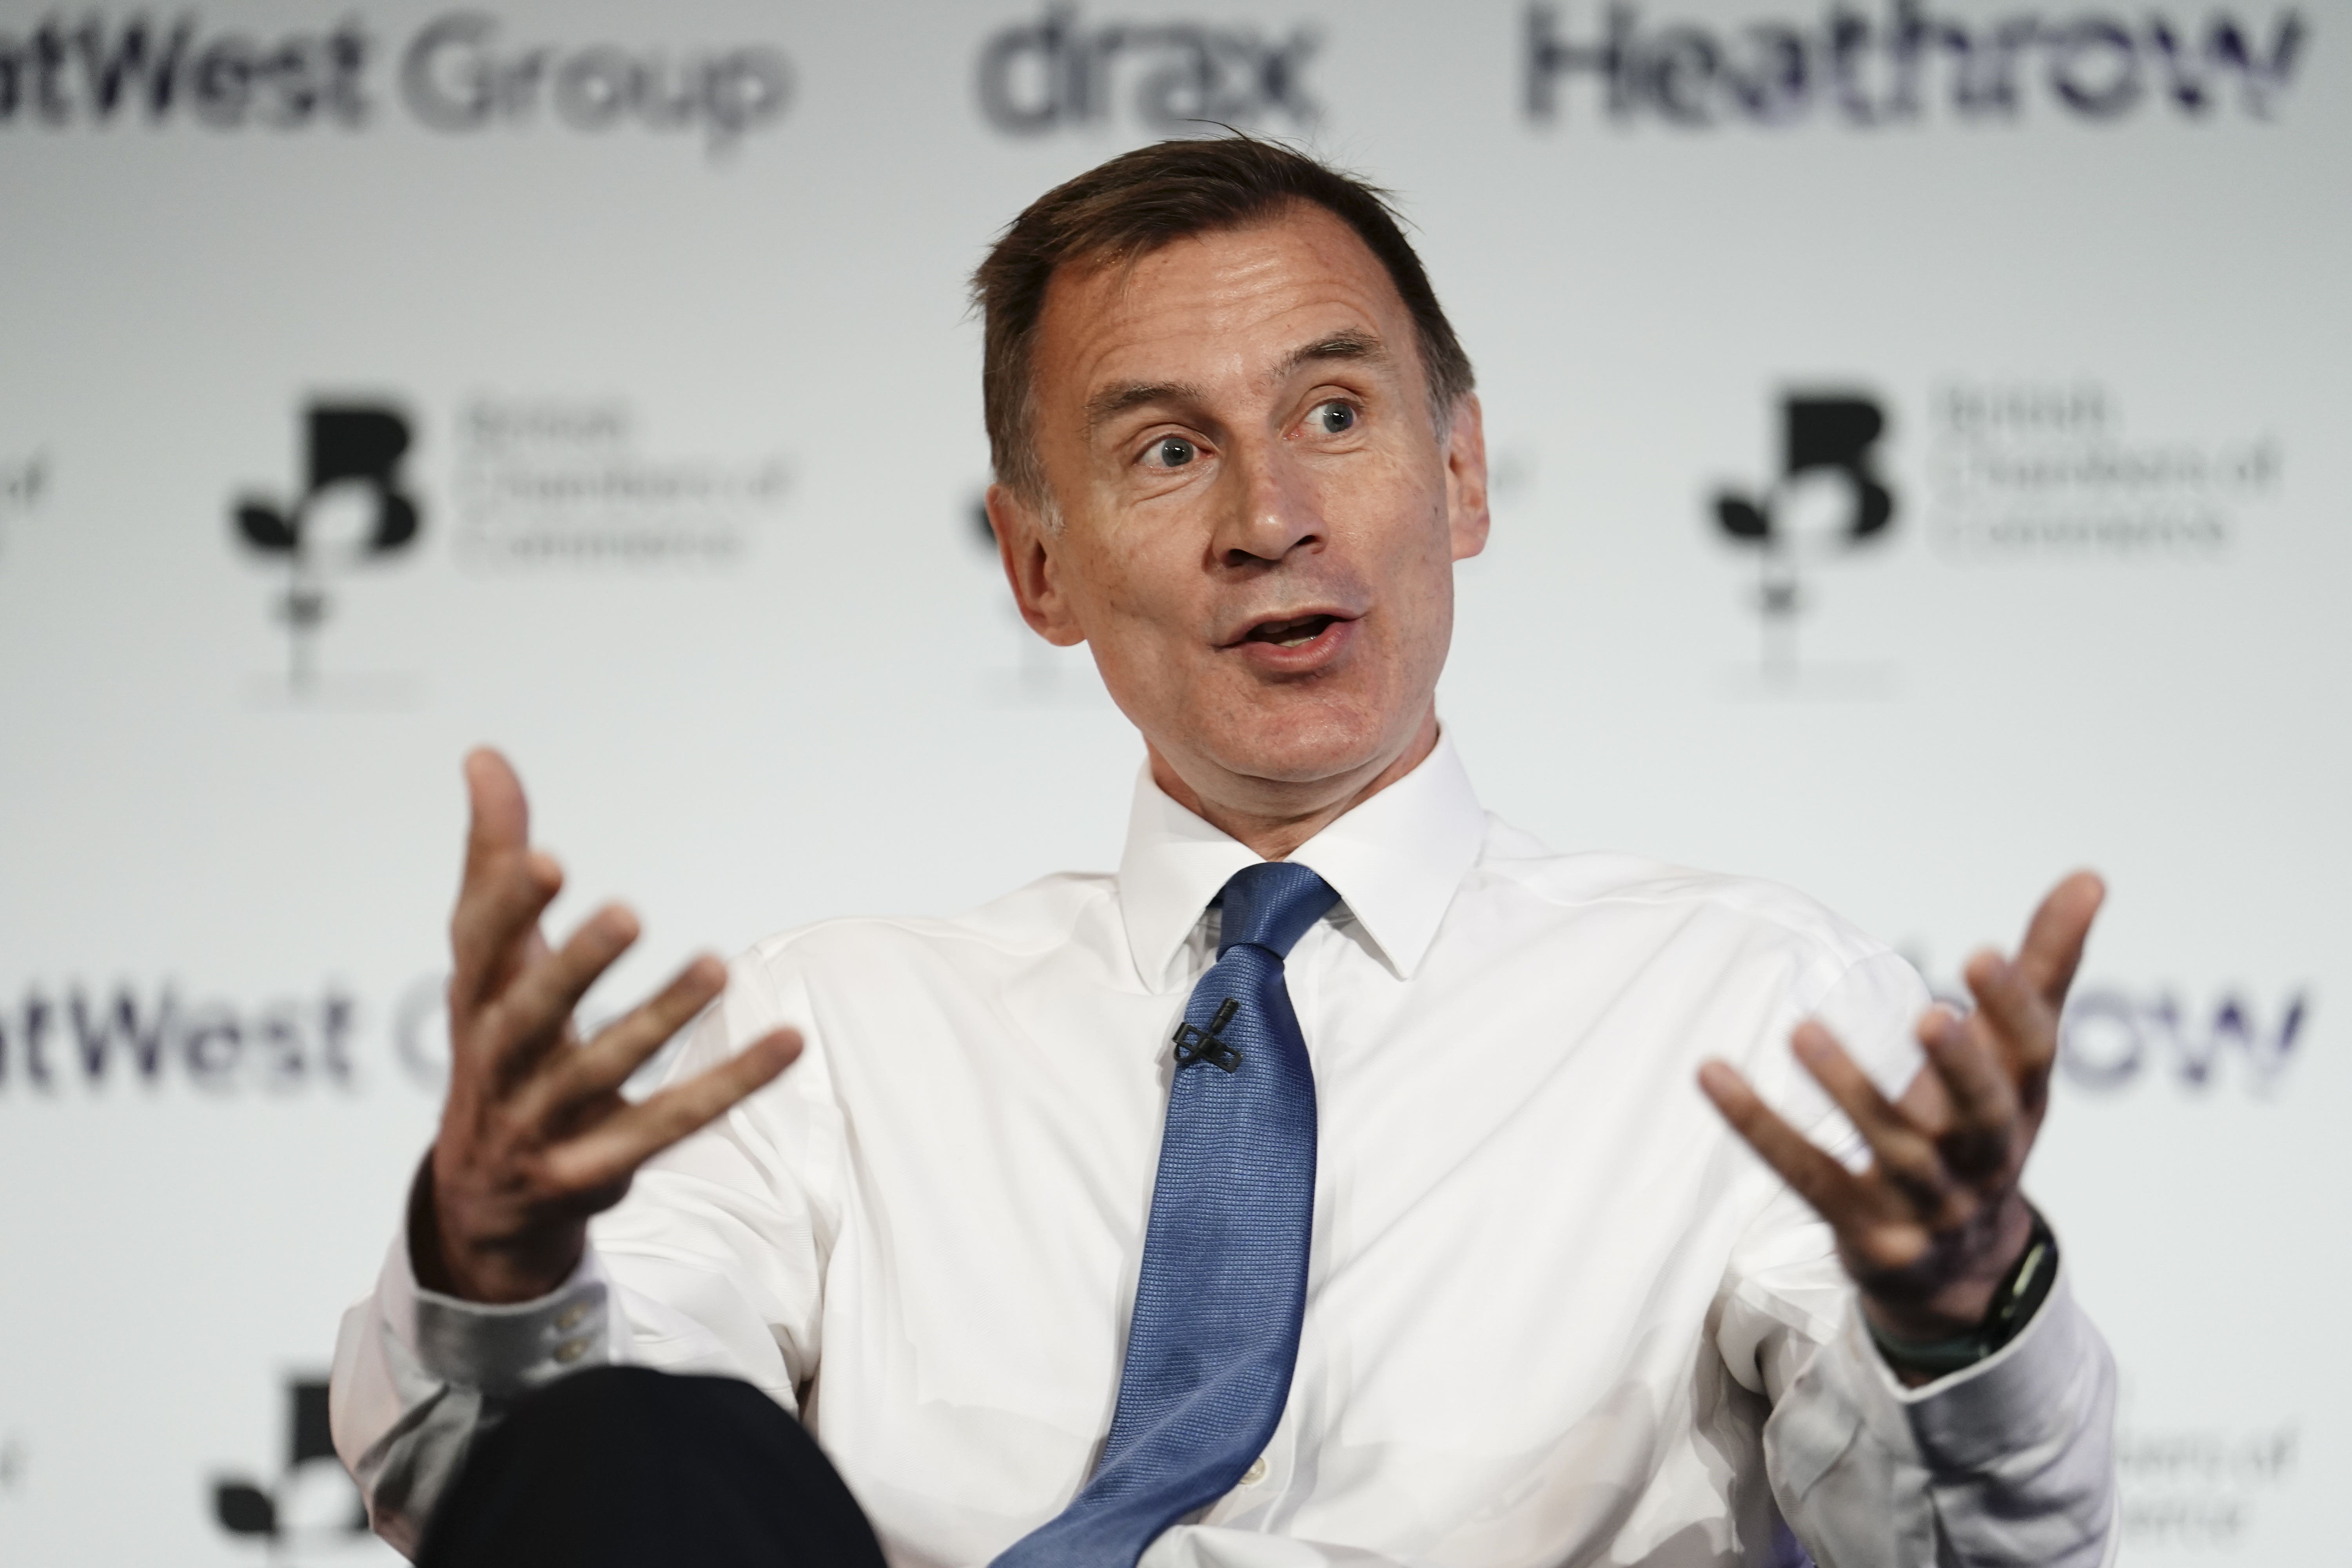 Jeremy Hunt’s brother was also diagnosed with sarcoma